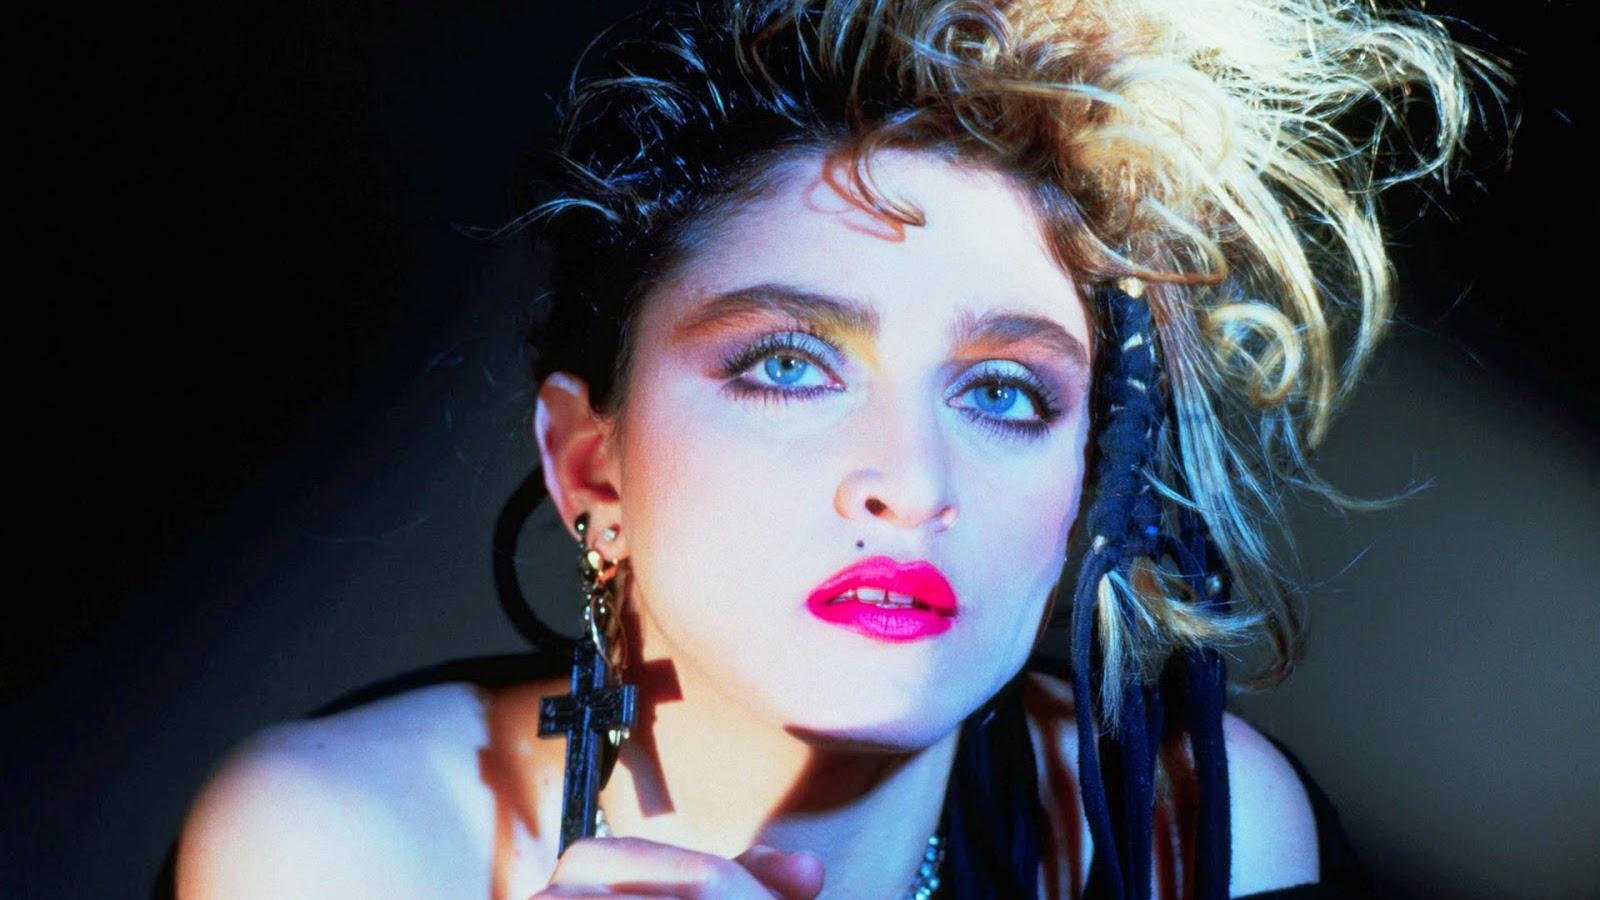 madonna's best beautiful picture, madonna's picture, best madonna